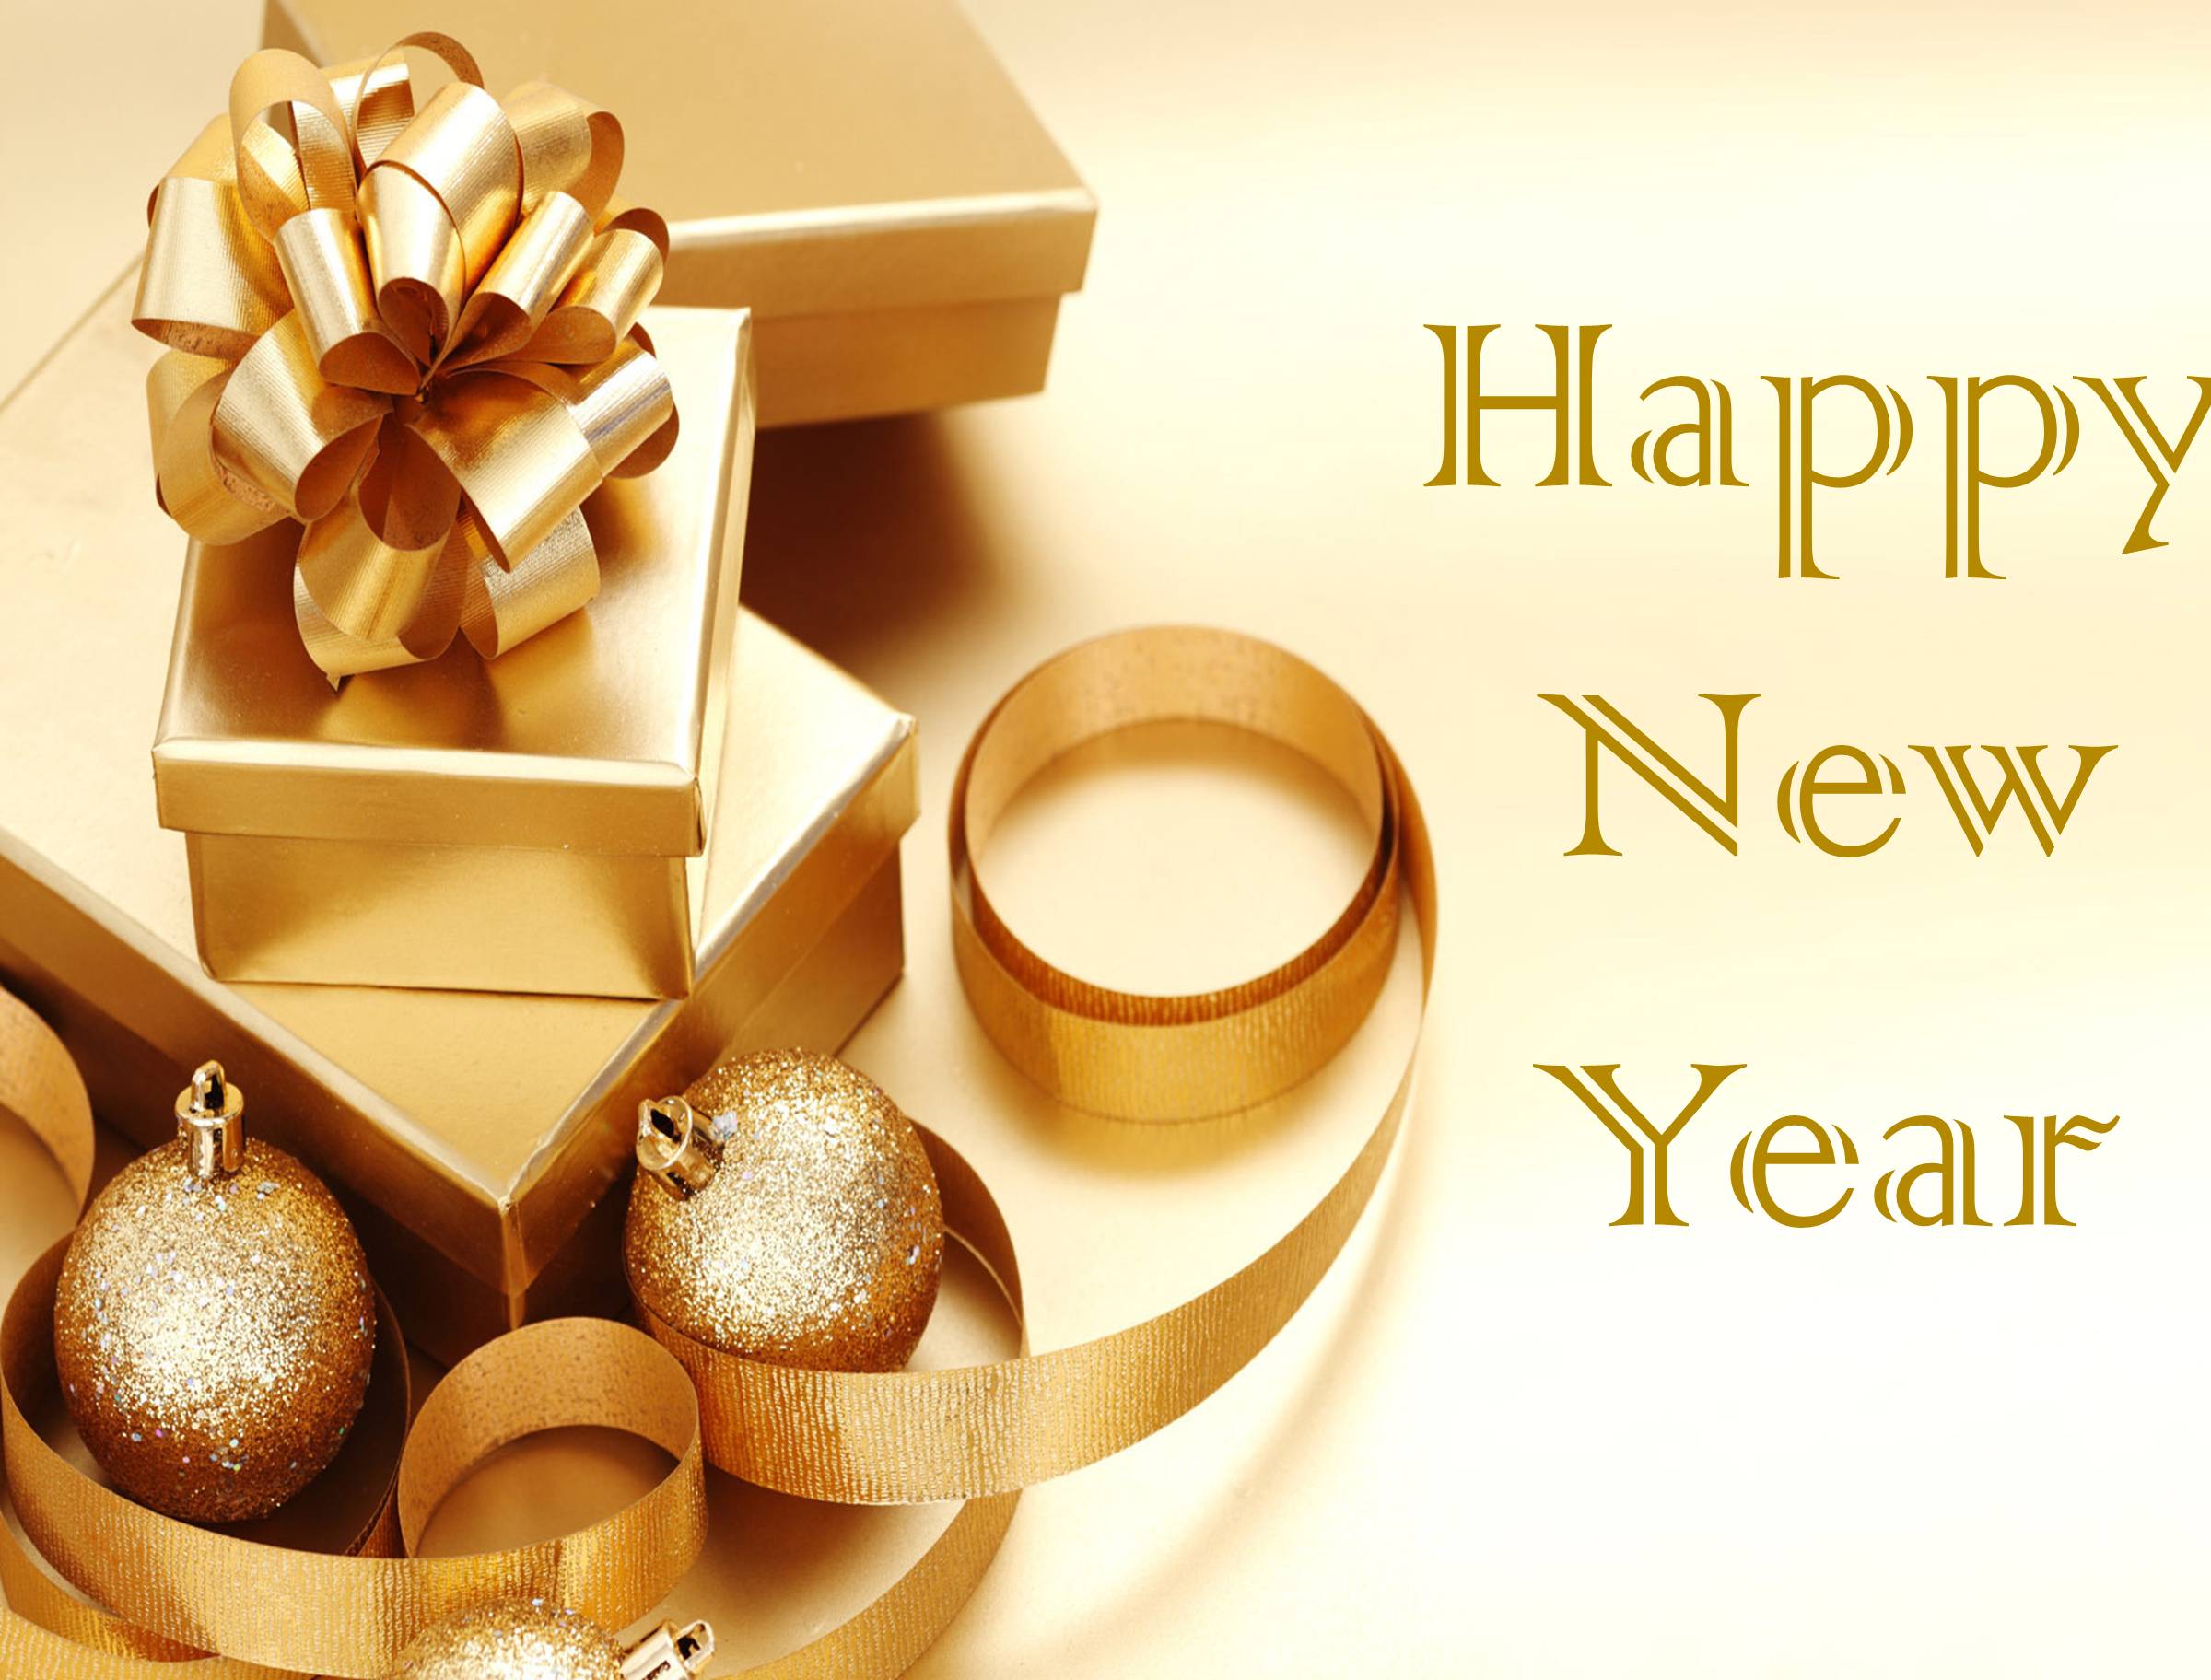 Happy New Year Golden Wishes Wallpaper Ongur